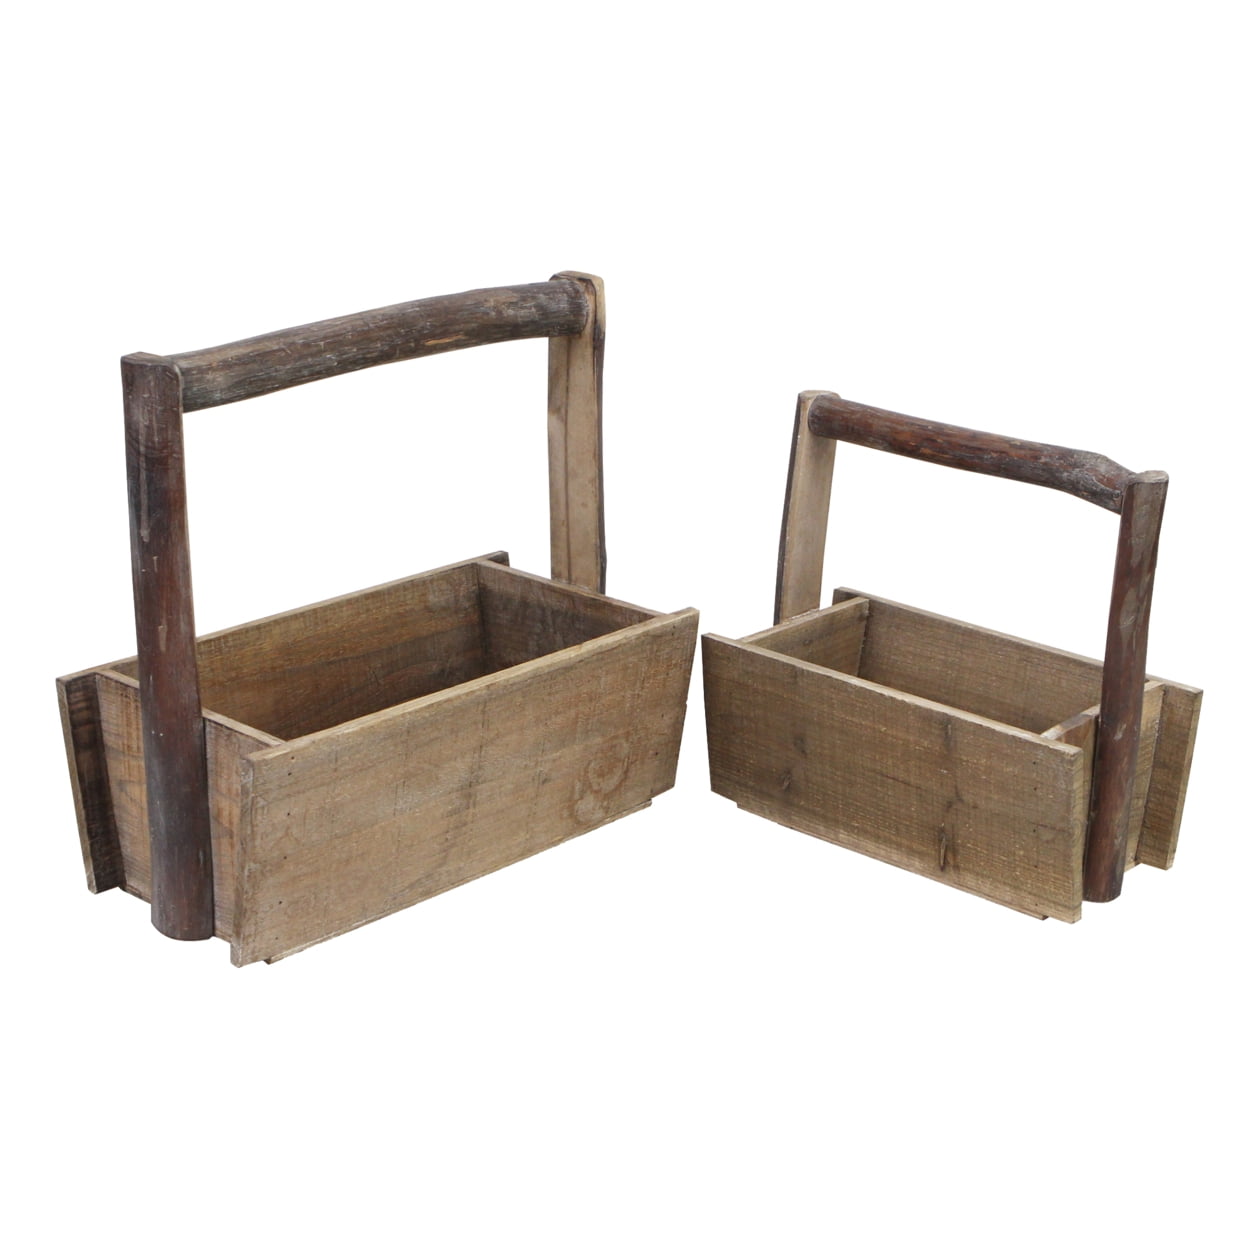 Picture of Cheungs 4902-2 Wooden Storage with wooden Handle - Set of 2